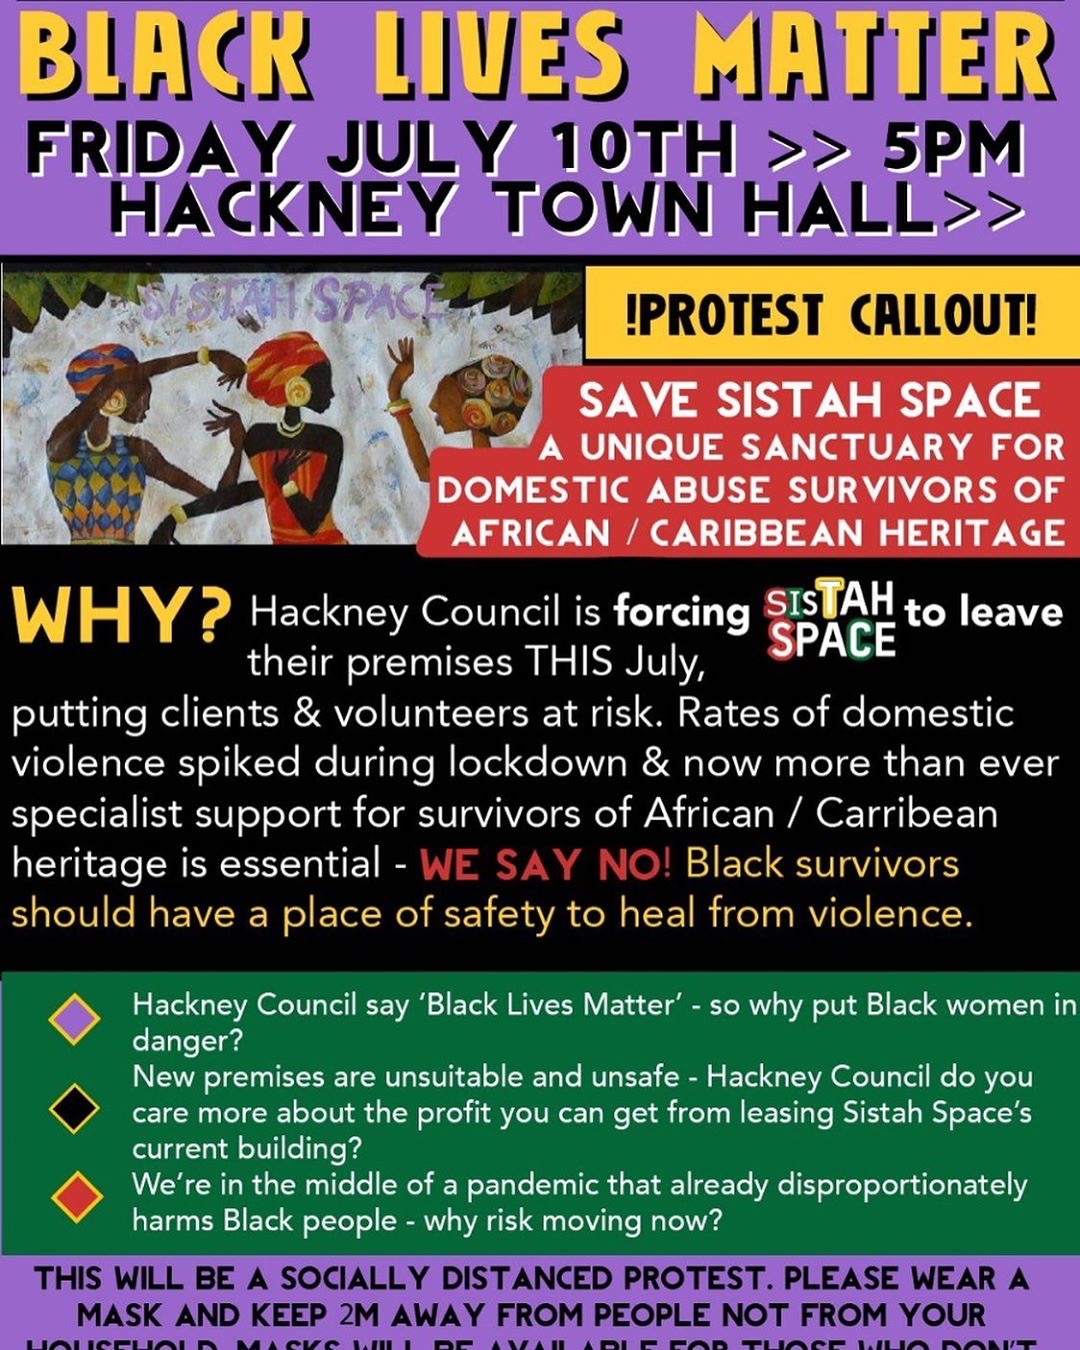 Hands off Sistah Space – defend services for women survivors of abuse